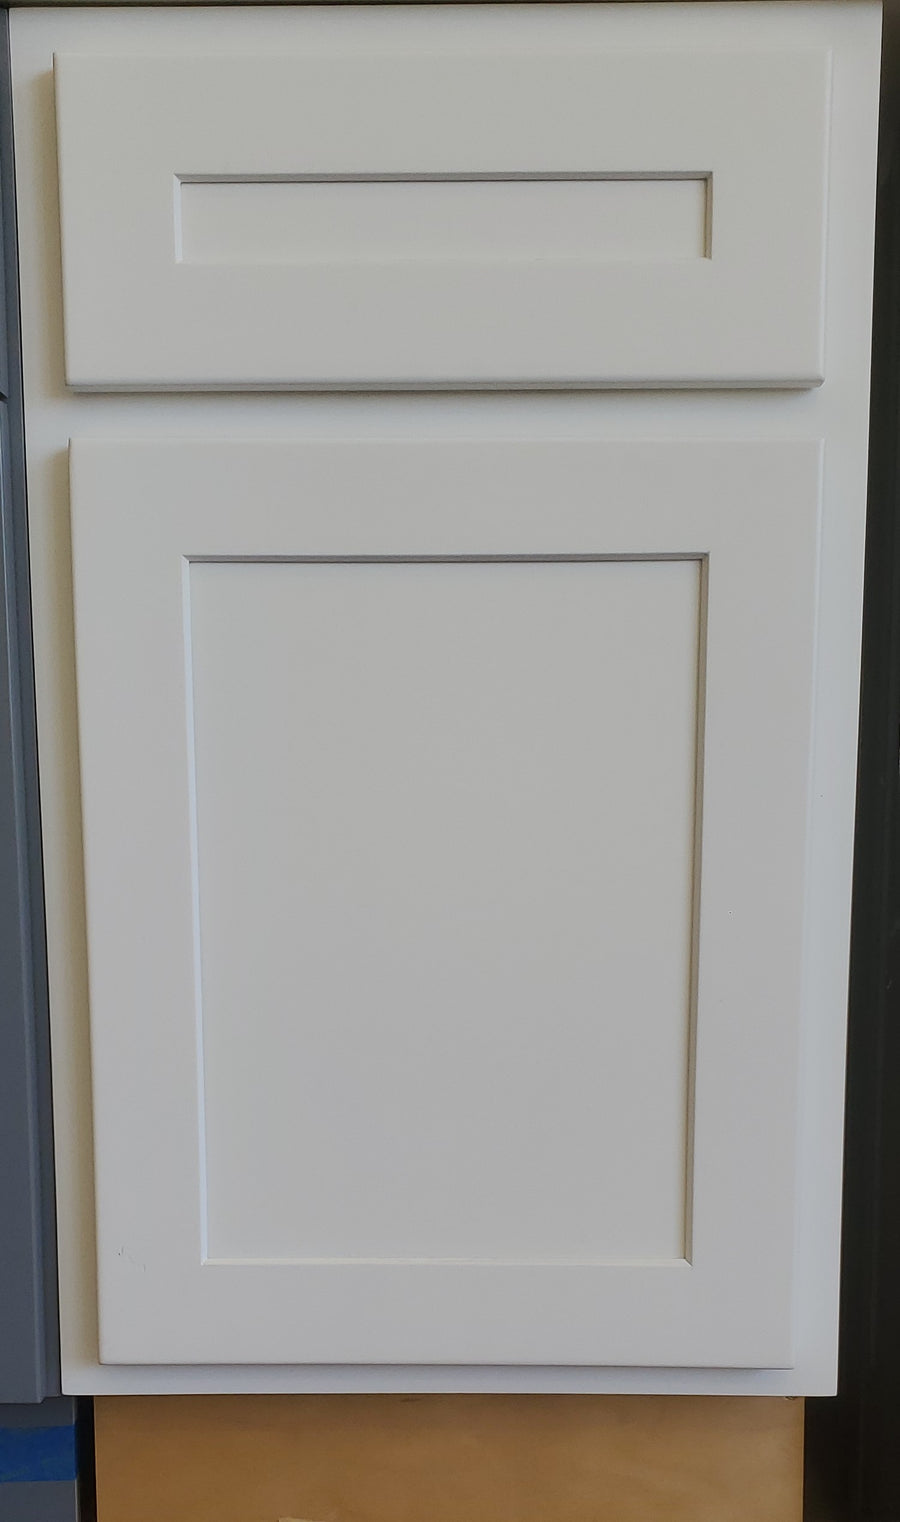 42" tall White Shaker 1/2" Overlay Wall Cabinet - Double Door 24", 27", 30", 33", 36" - RTA Wholesalers